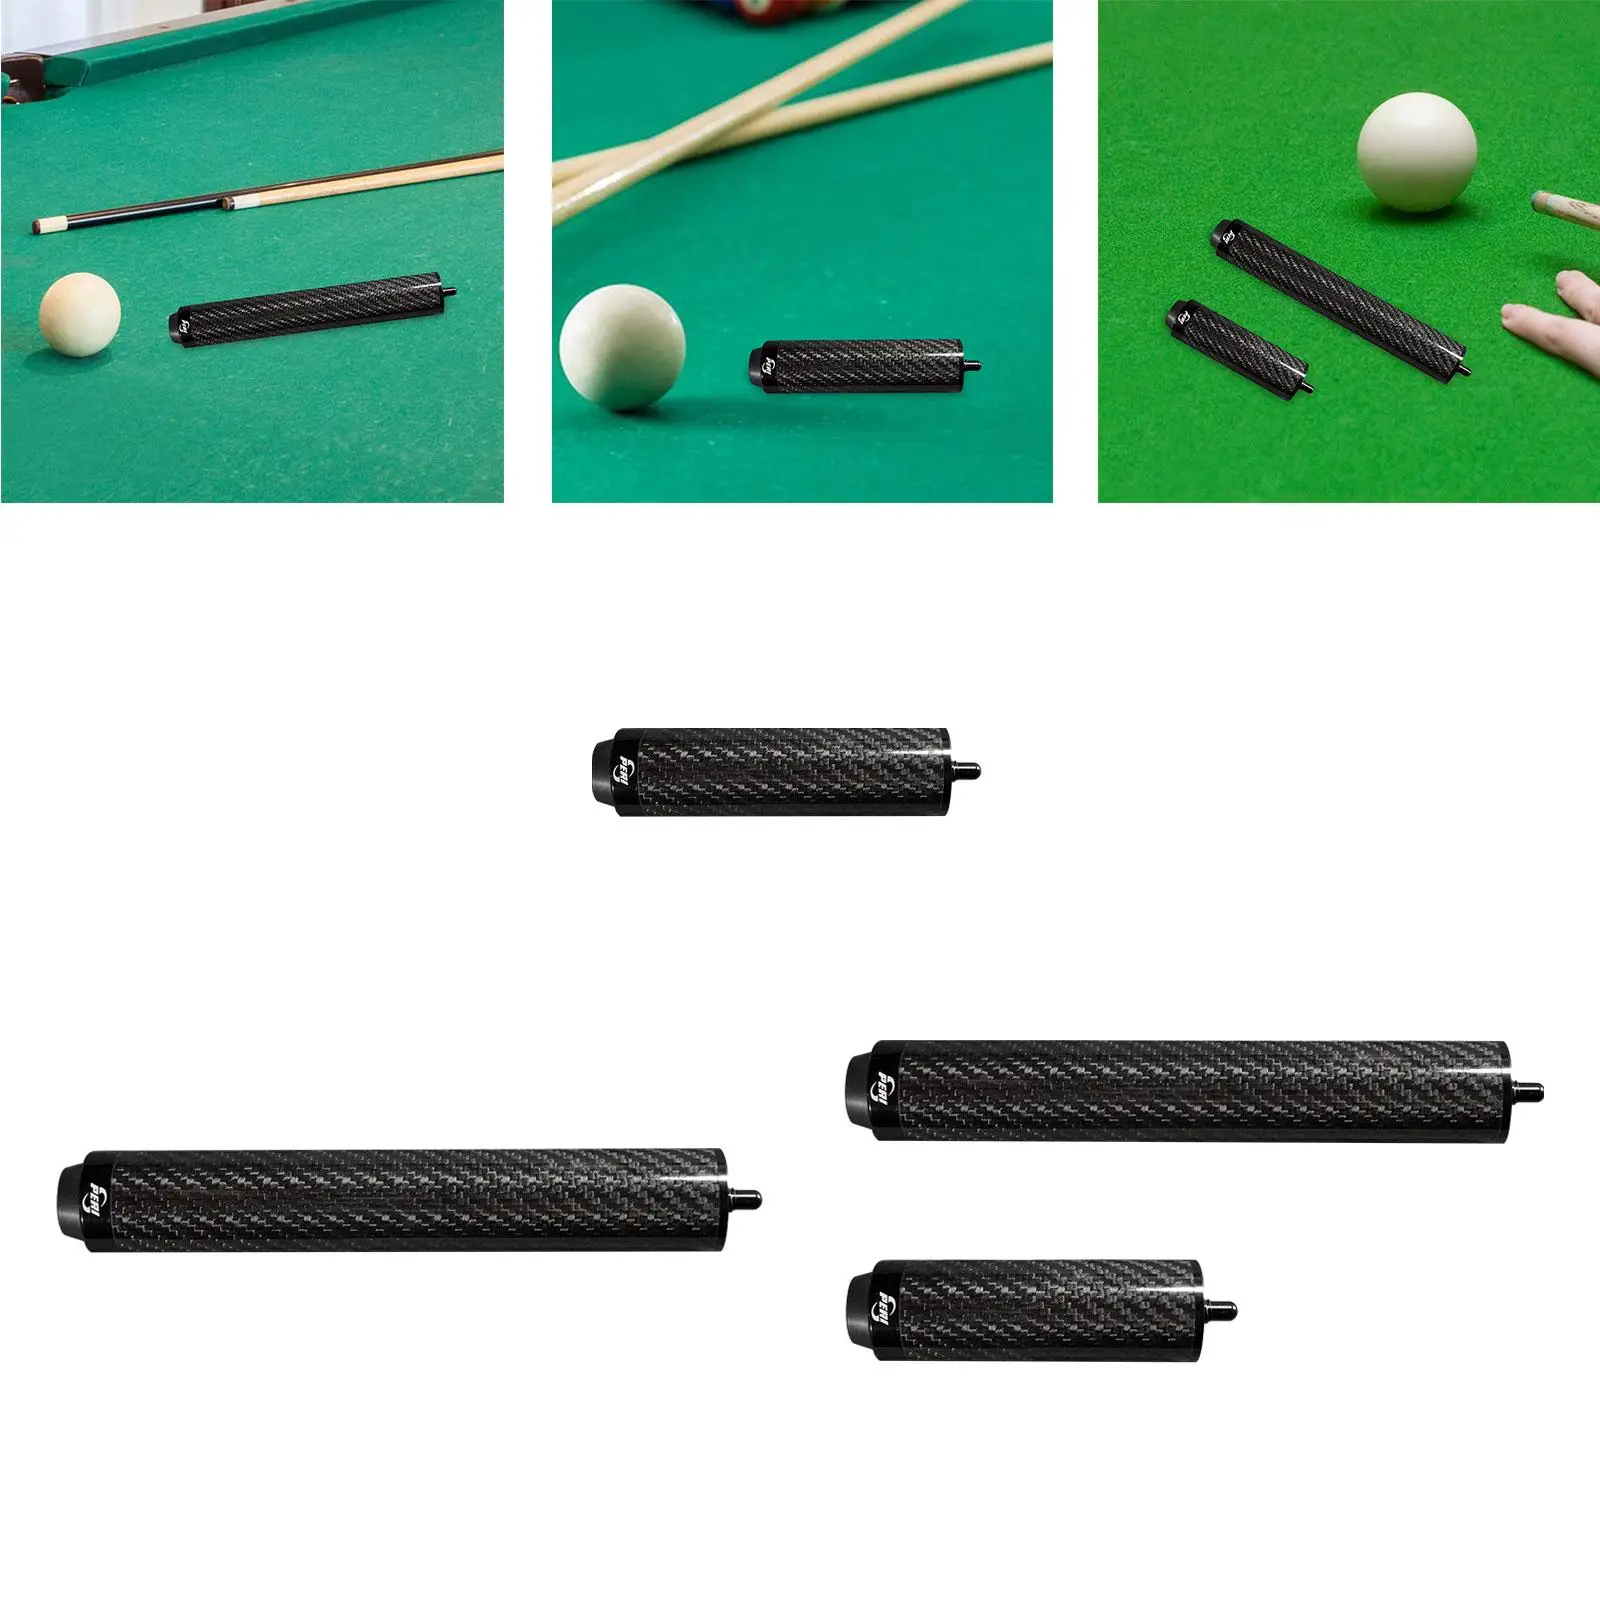 Cue Rod Extension Billiards Pool Cue Extension Compact Portable Black Billiard Connect Shaft Snooker for Billiard Cues